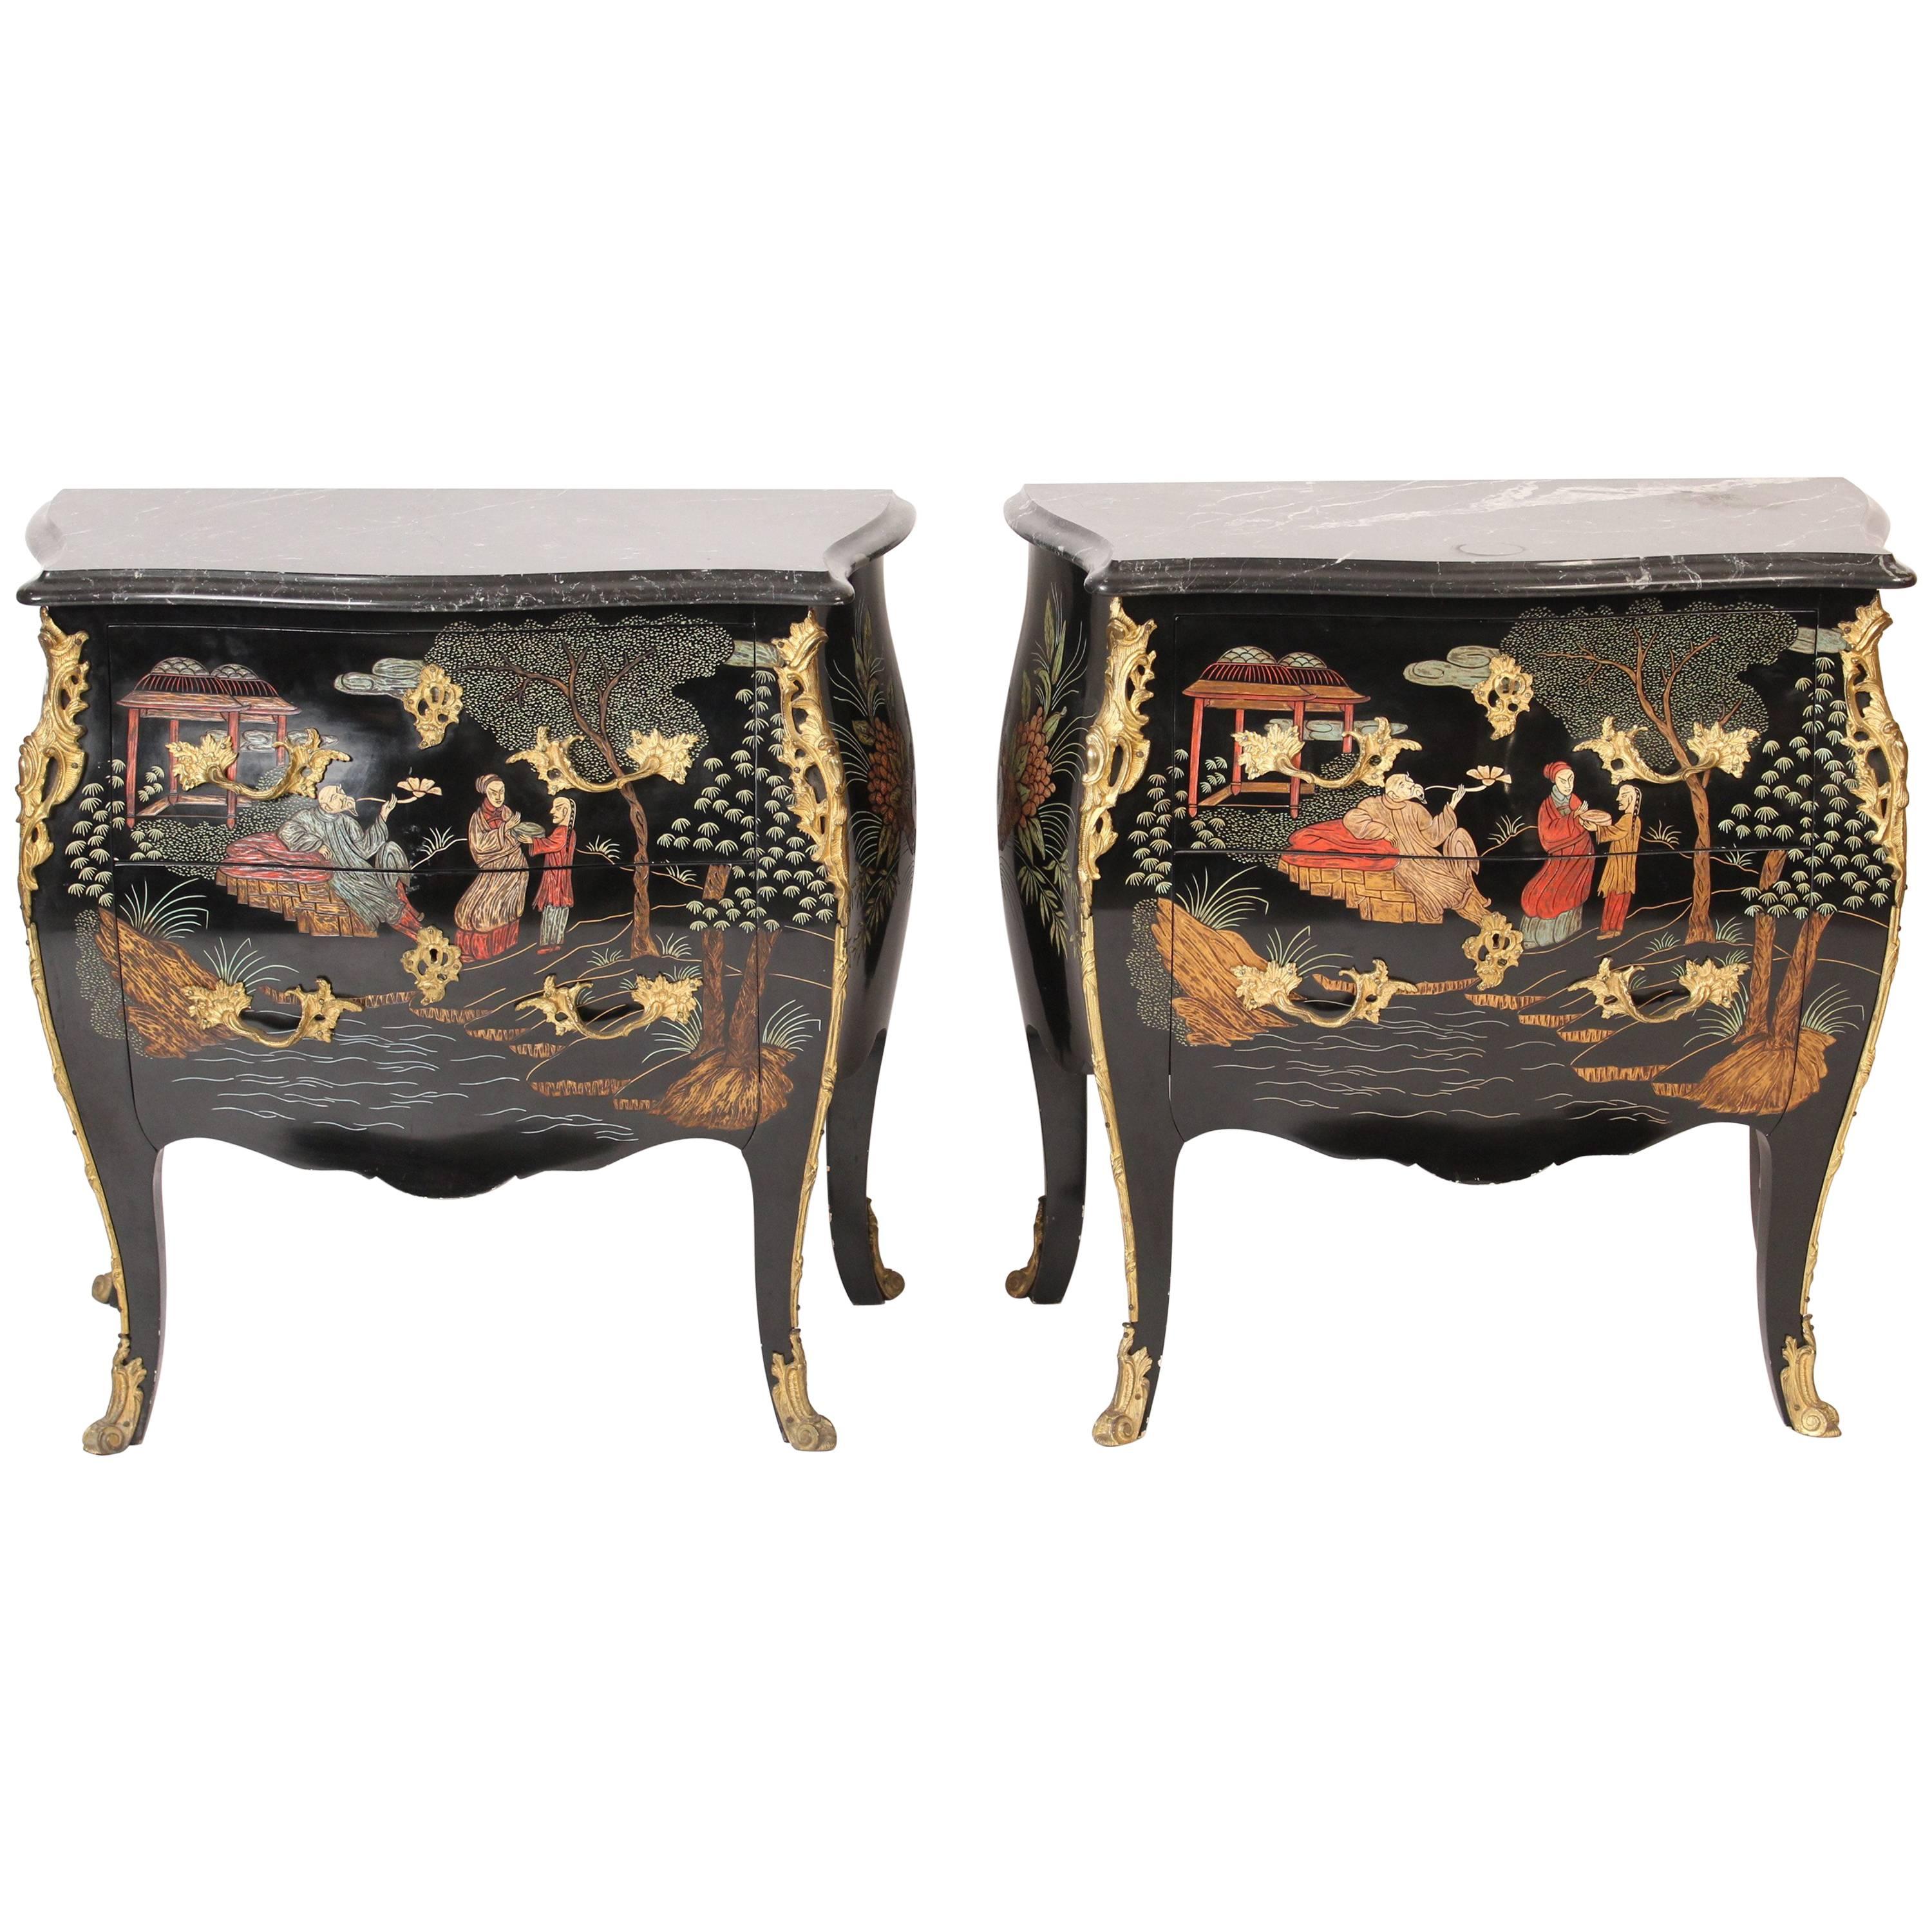 Pair of Louis XV Style Coromandel Lacquer Commodes